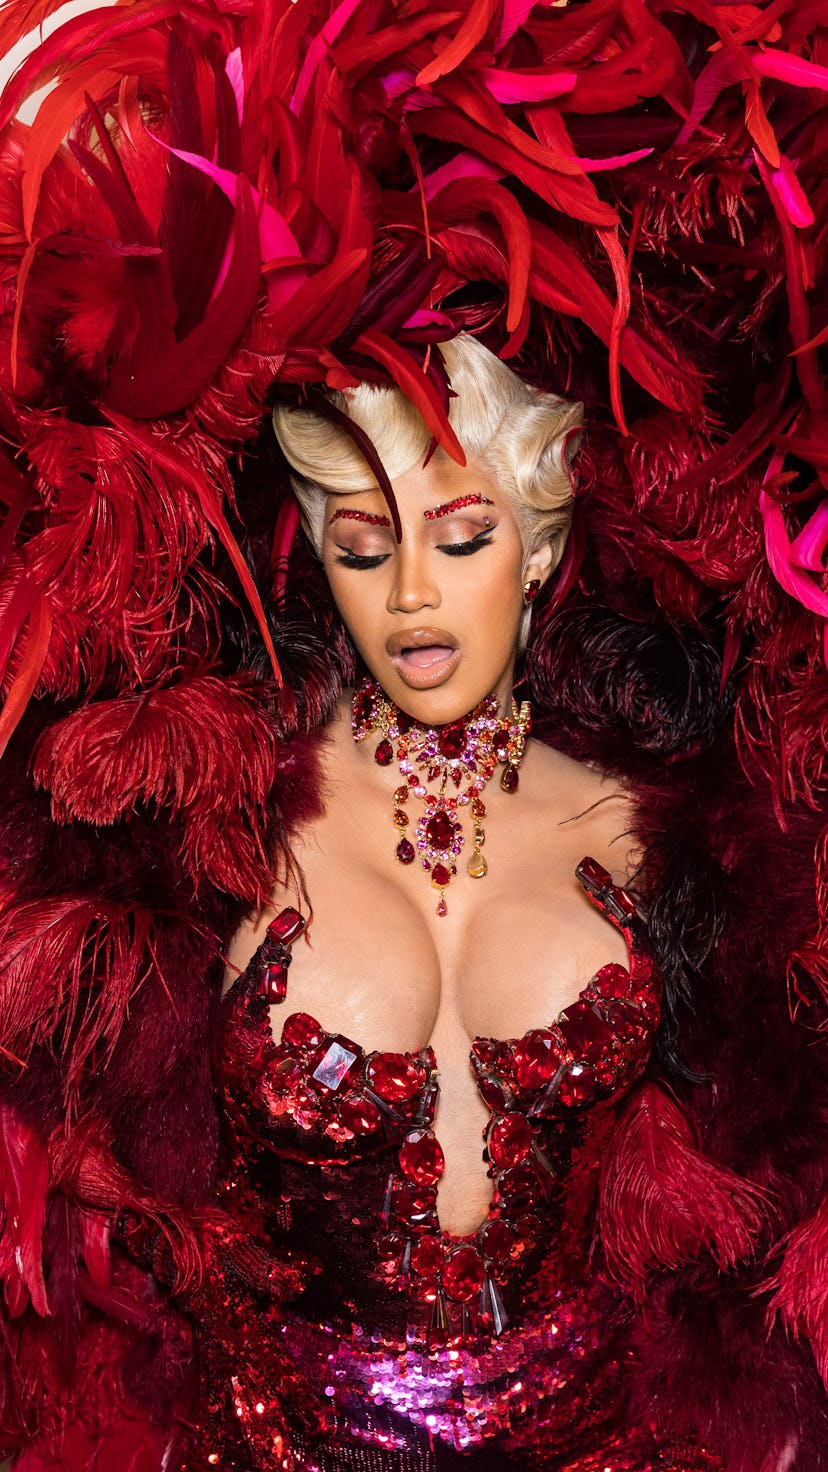 Cardi B's Paris Fashion Week 2021 looks made her the MVP at the front row. From feathers to breastpl...